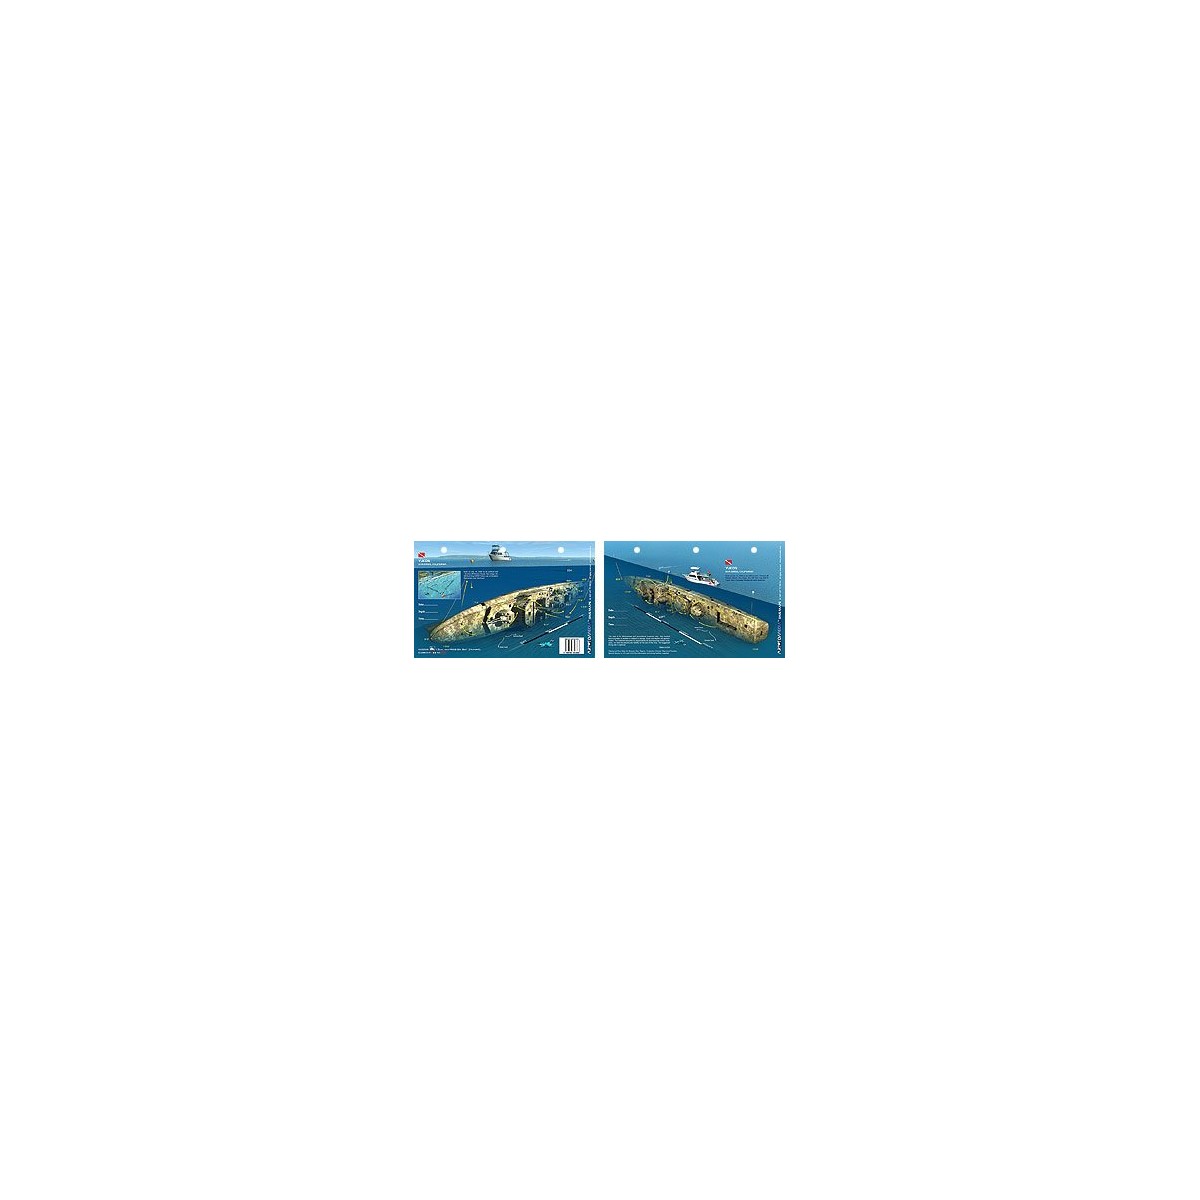 Yukon in San Diego, California (8.5 x 5.5 Inches) (21.6 x 15cm) - New Art to Media Underwater Waterproof 3D Dive Site Map